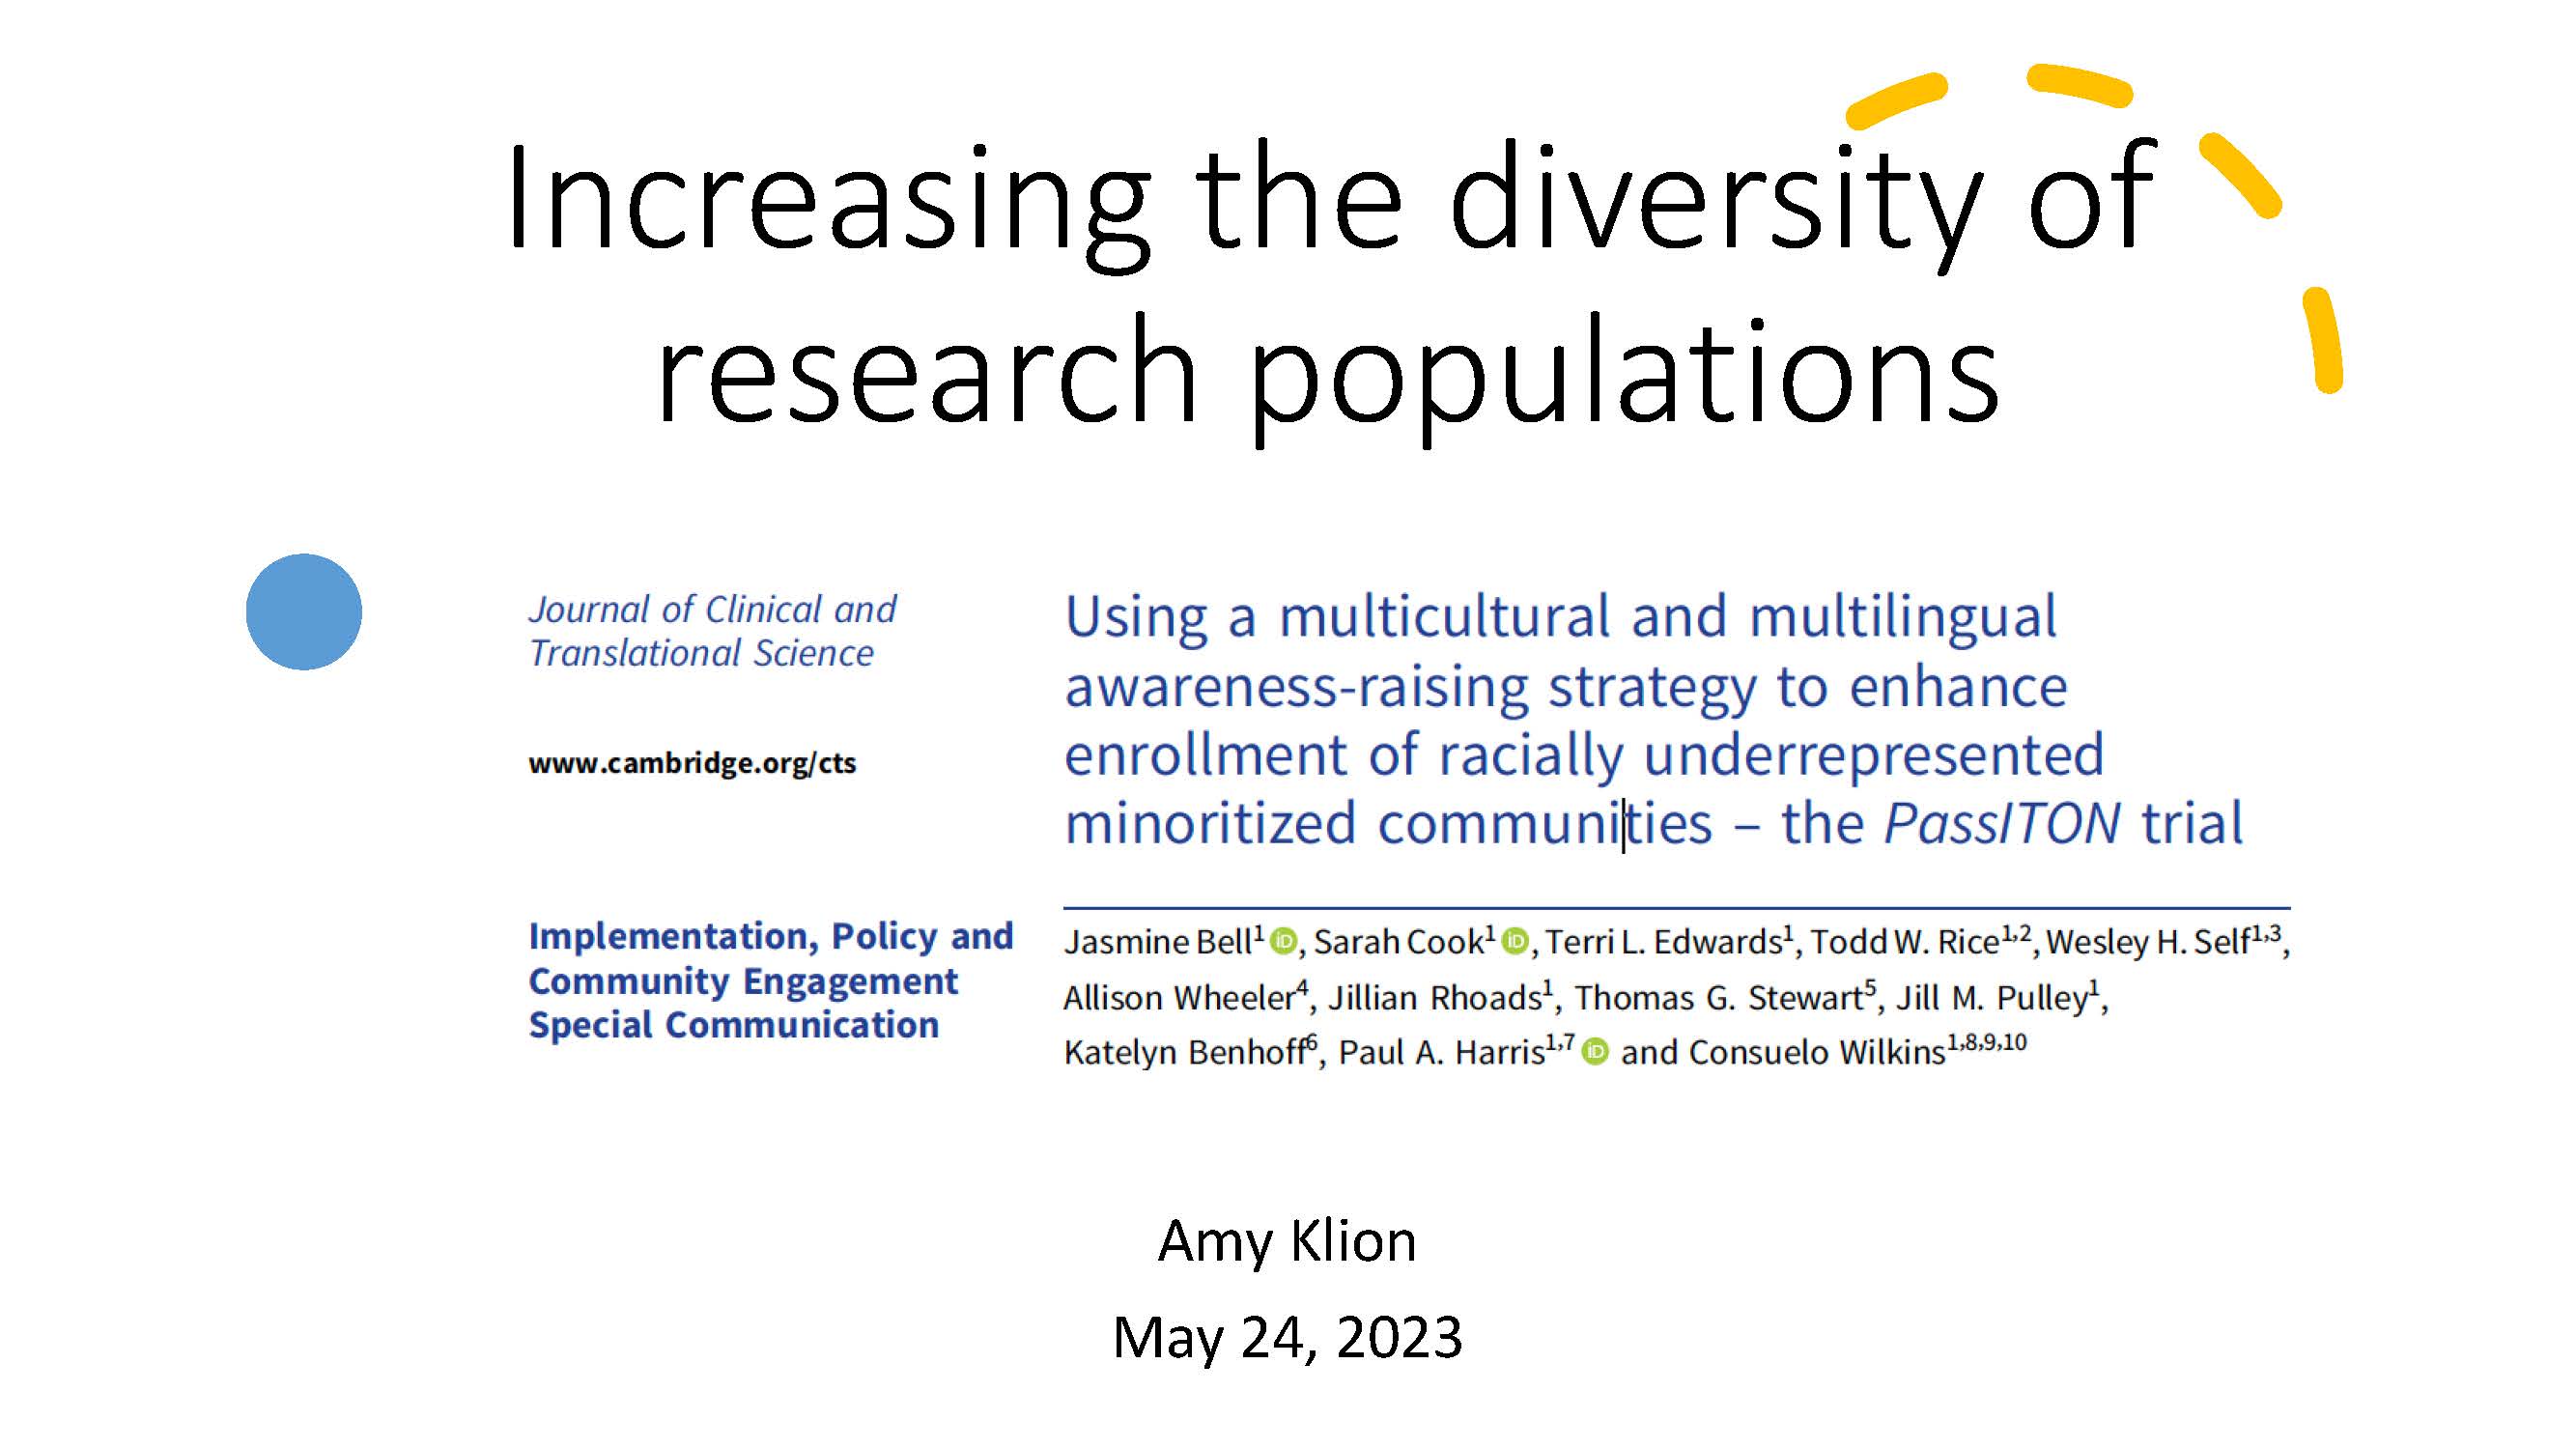 View the CEGIR 2023 Presentation on Increasing Diversity of Research Publication.